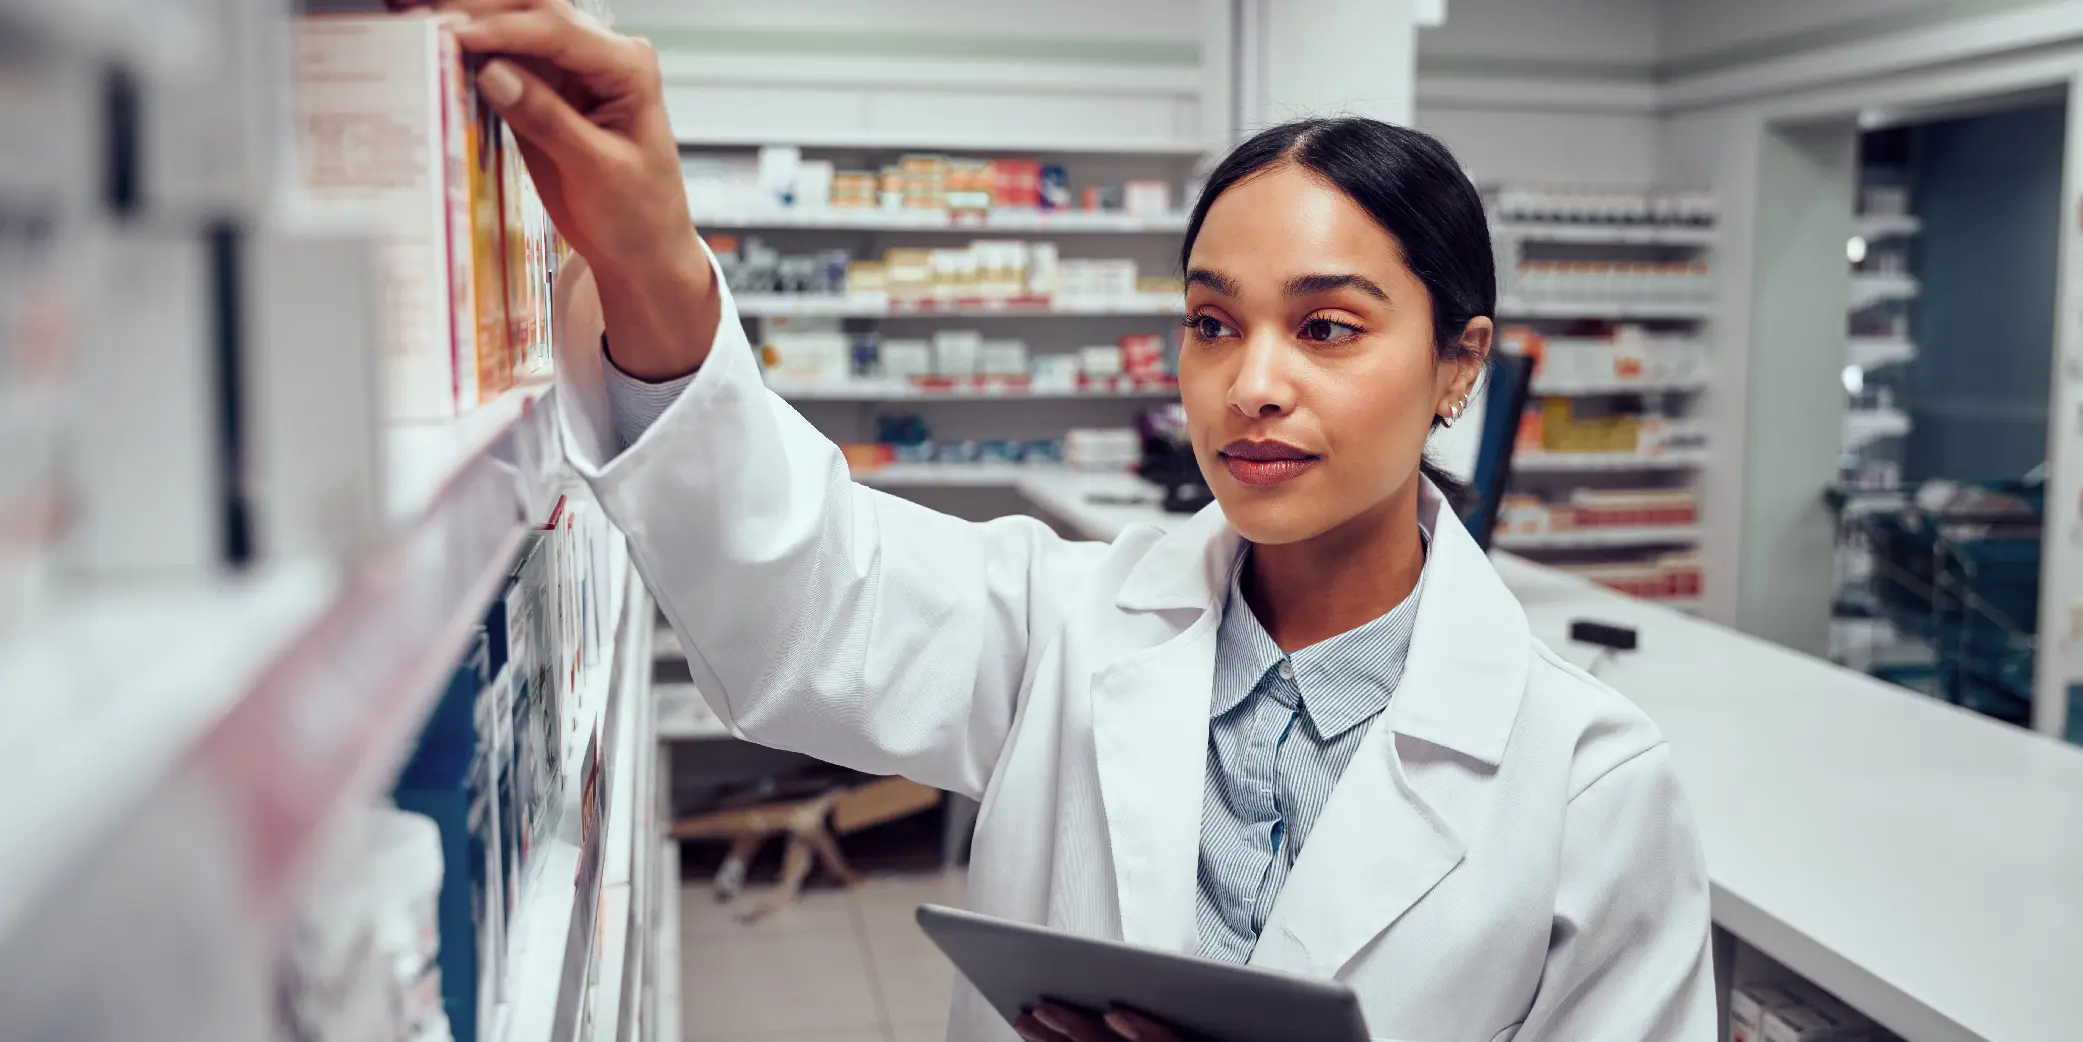 Woman Wearing Lab coat Holding Digital Tablet Searching for Medicine on Shelves of Pharmacy